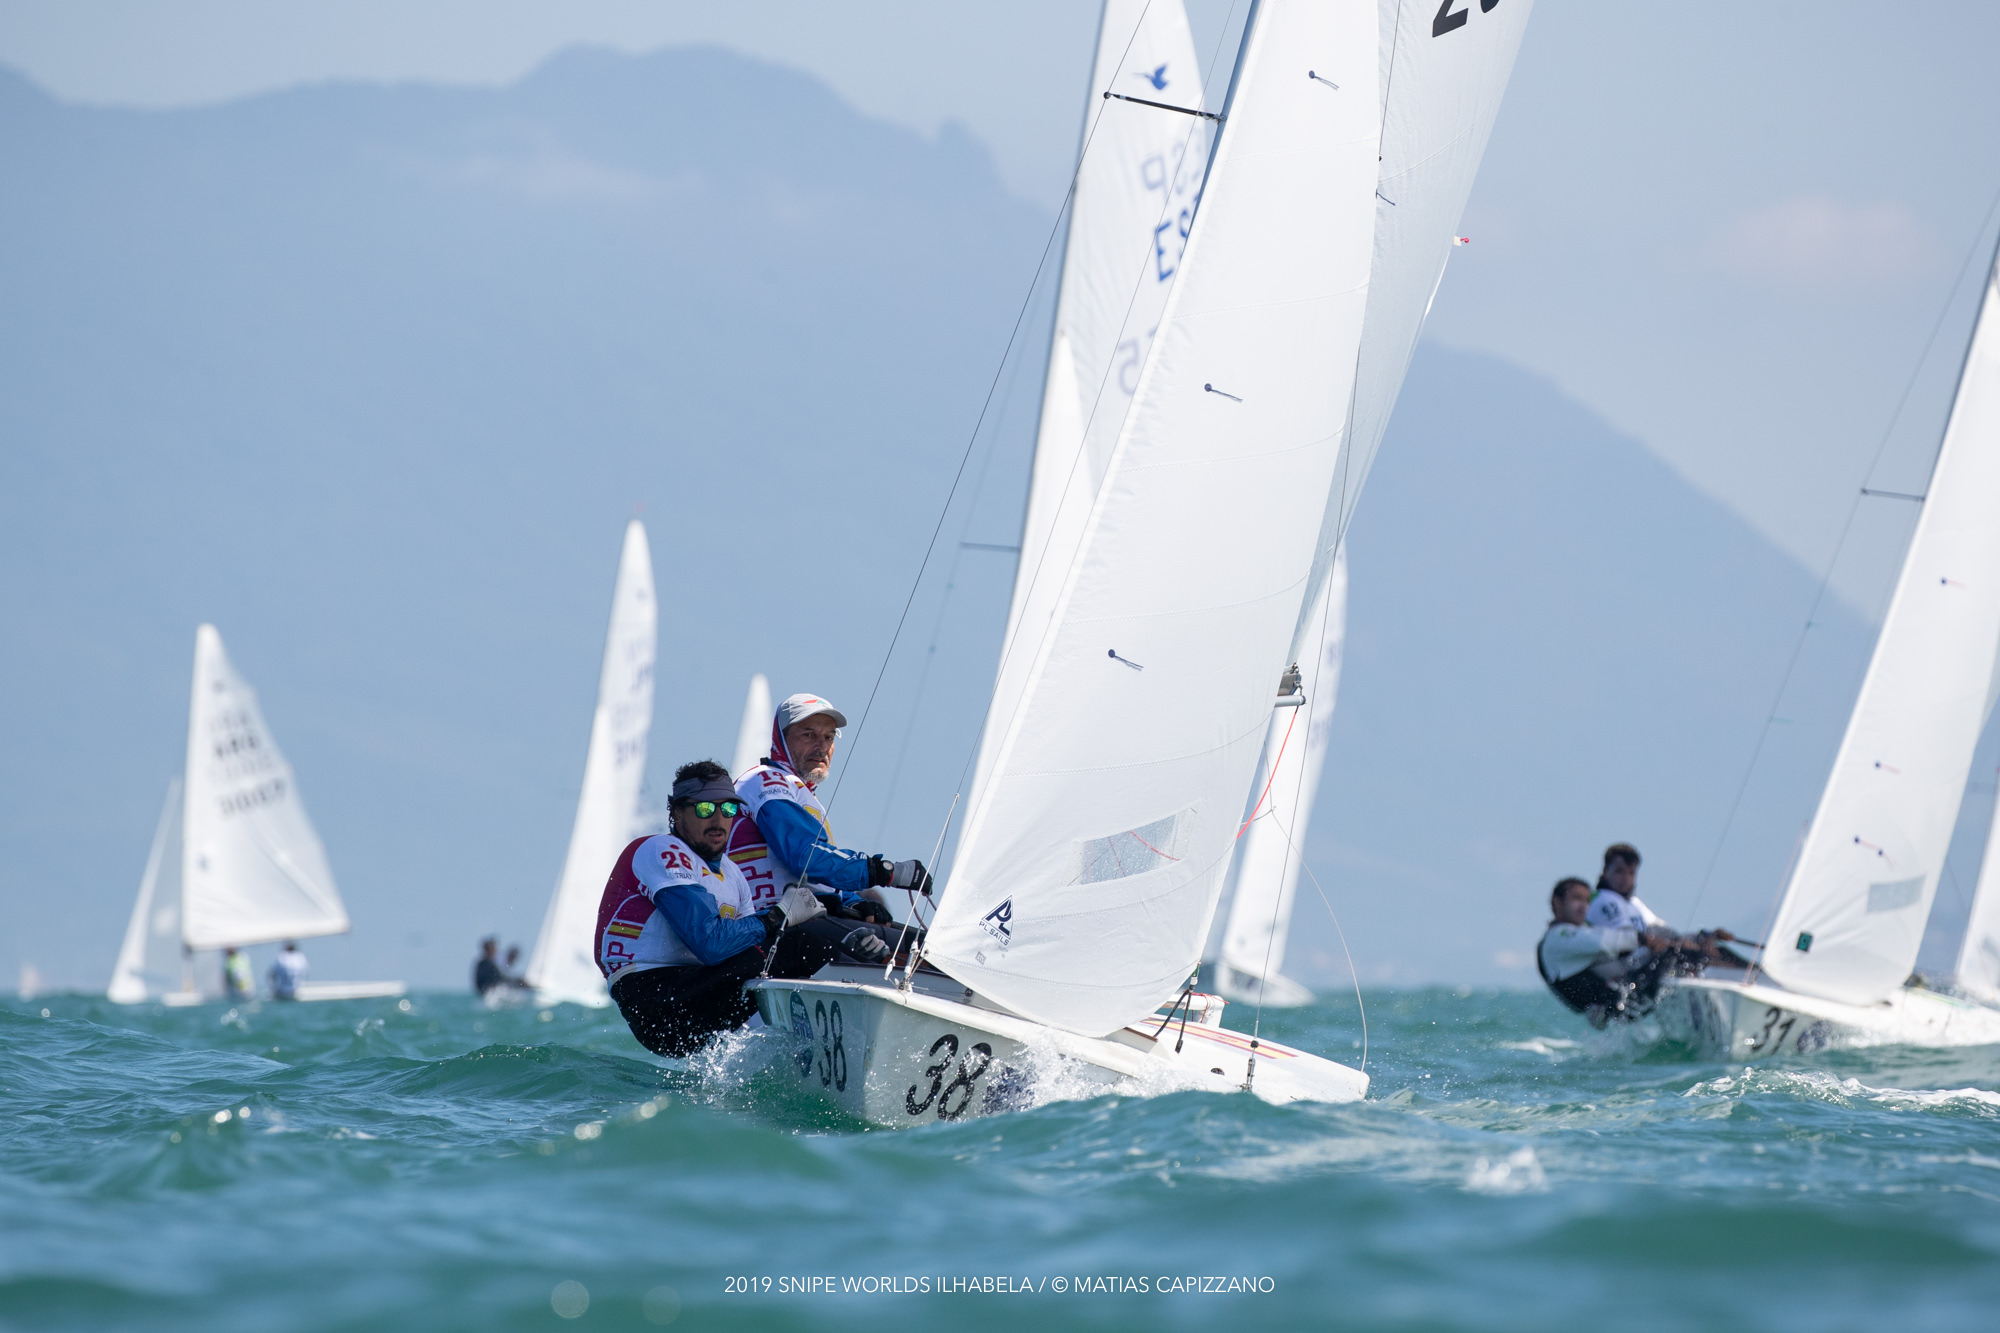  Snipe  World Championship 2019  Ilhabela BRA  Day 4, duel for the title today